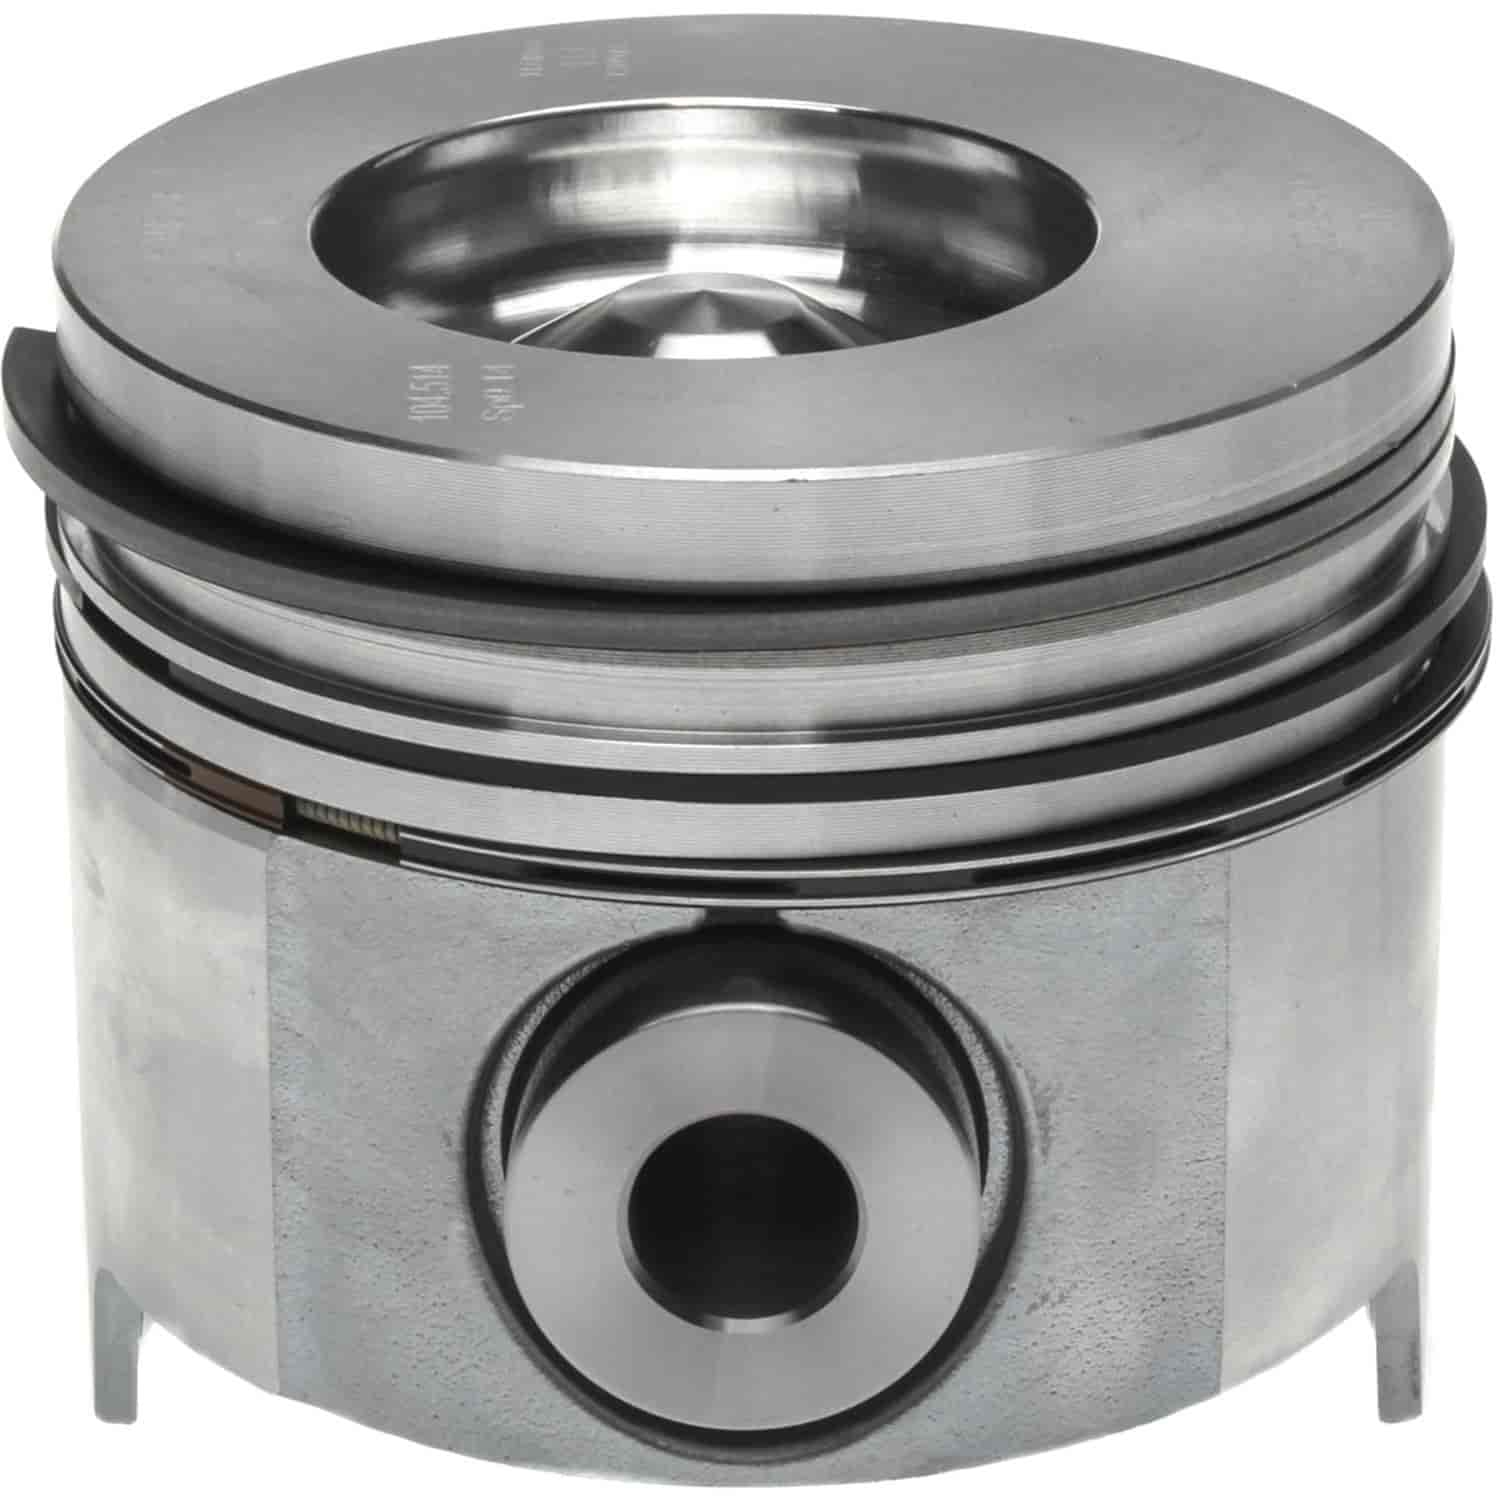 Piston and Rings Set 2001-2005 Chevy/GMC Duramax Diesel V8 6.6L Right Bank with 4.095" Bore (+.040")